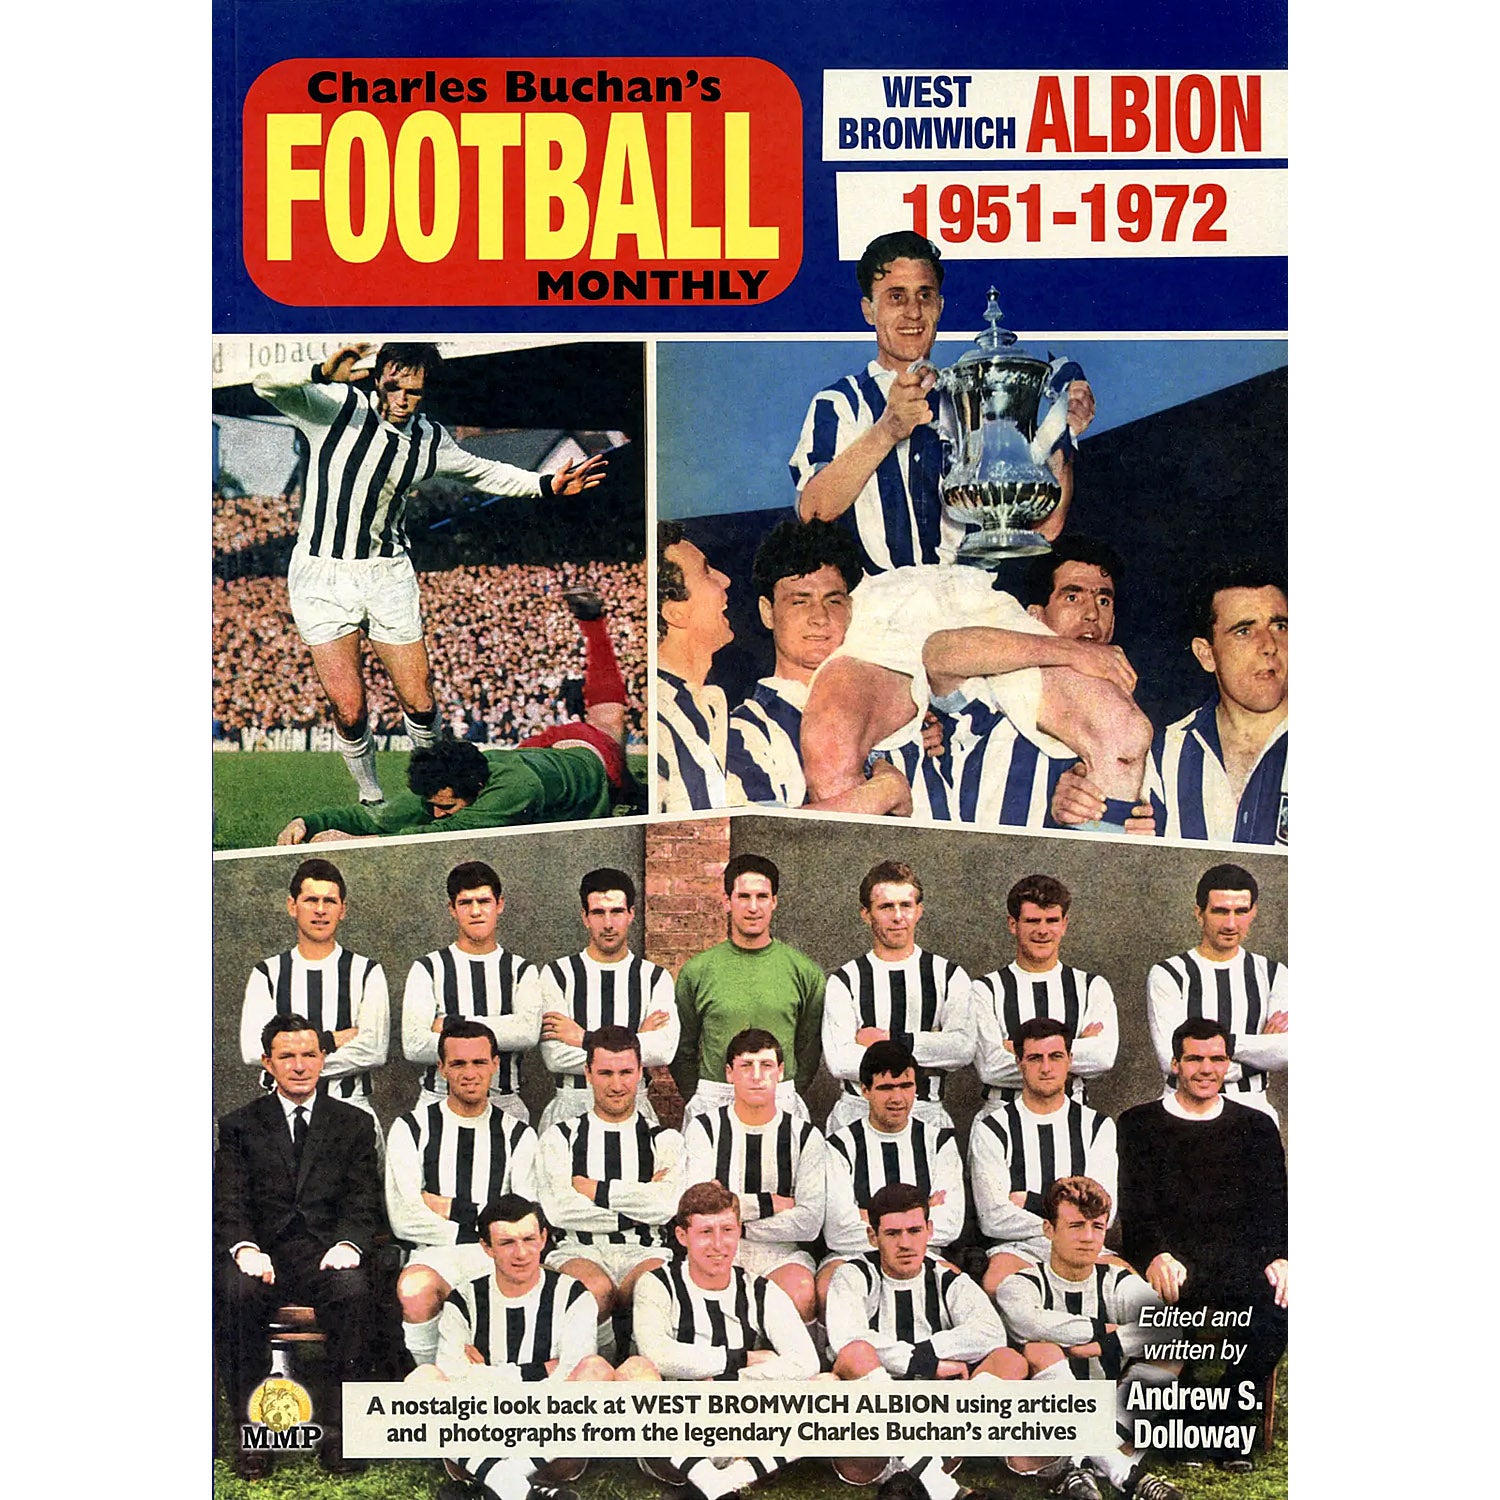 Charles Buchan's Football Monthly – West Bromwich Albion 1951-1972